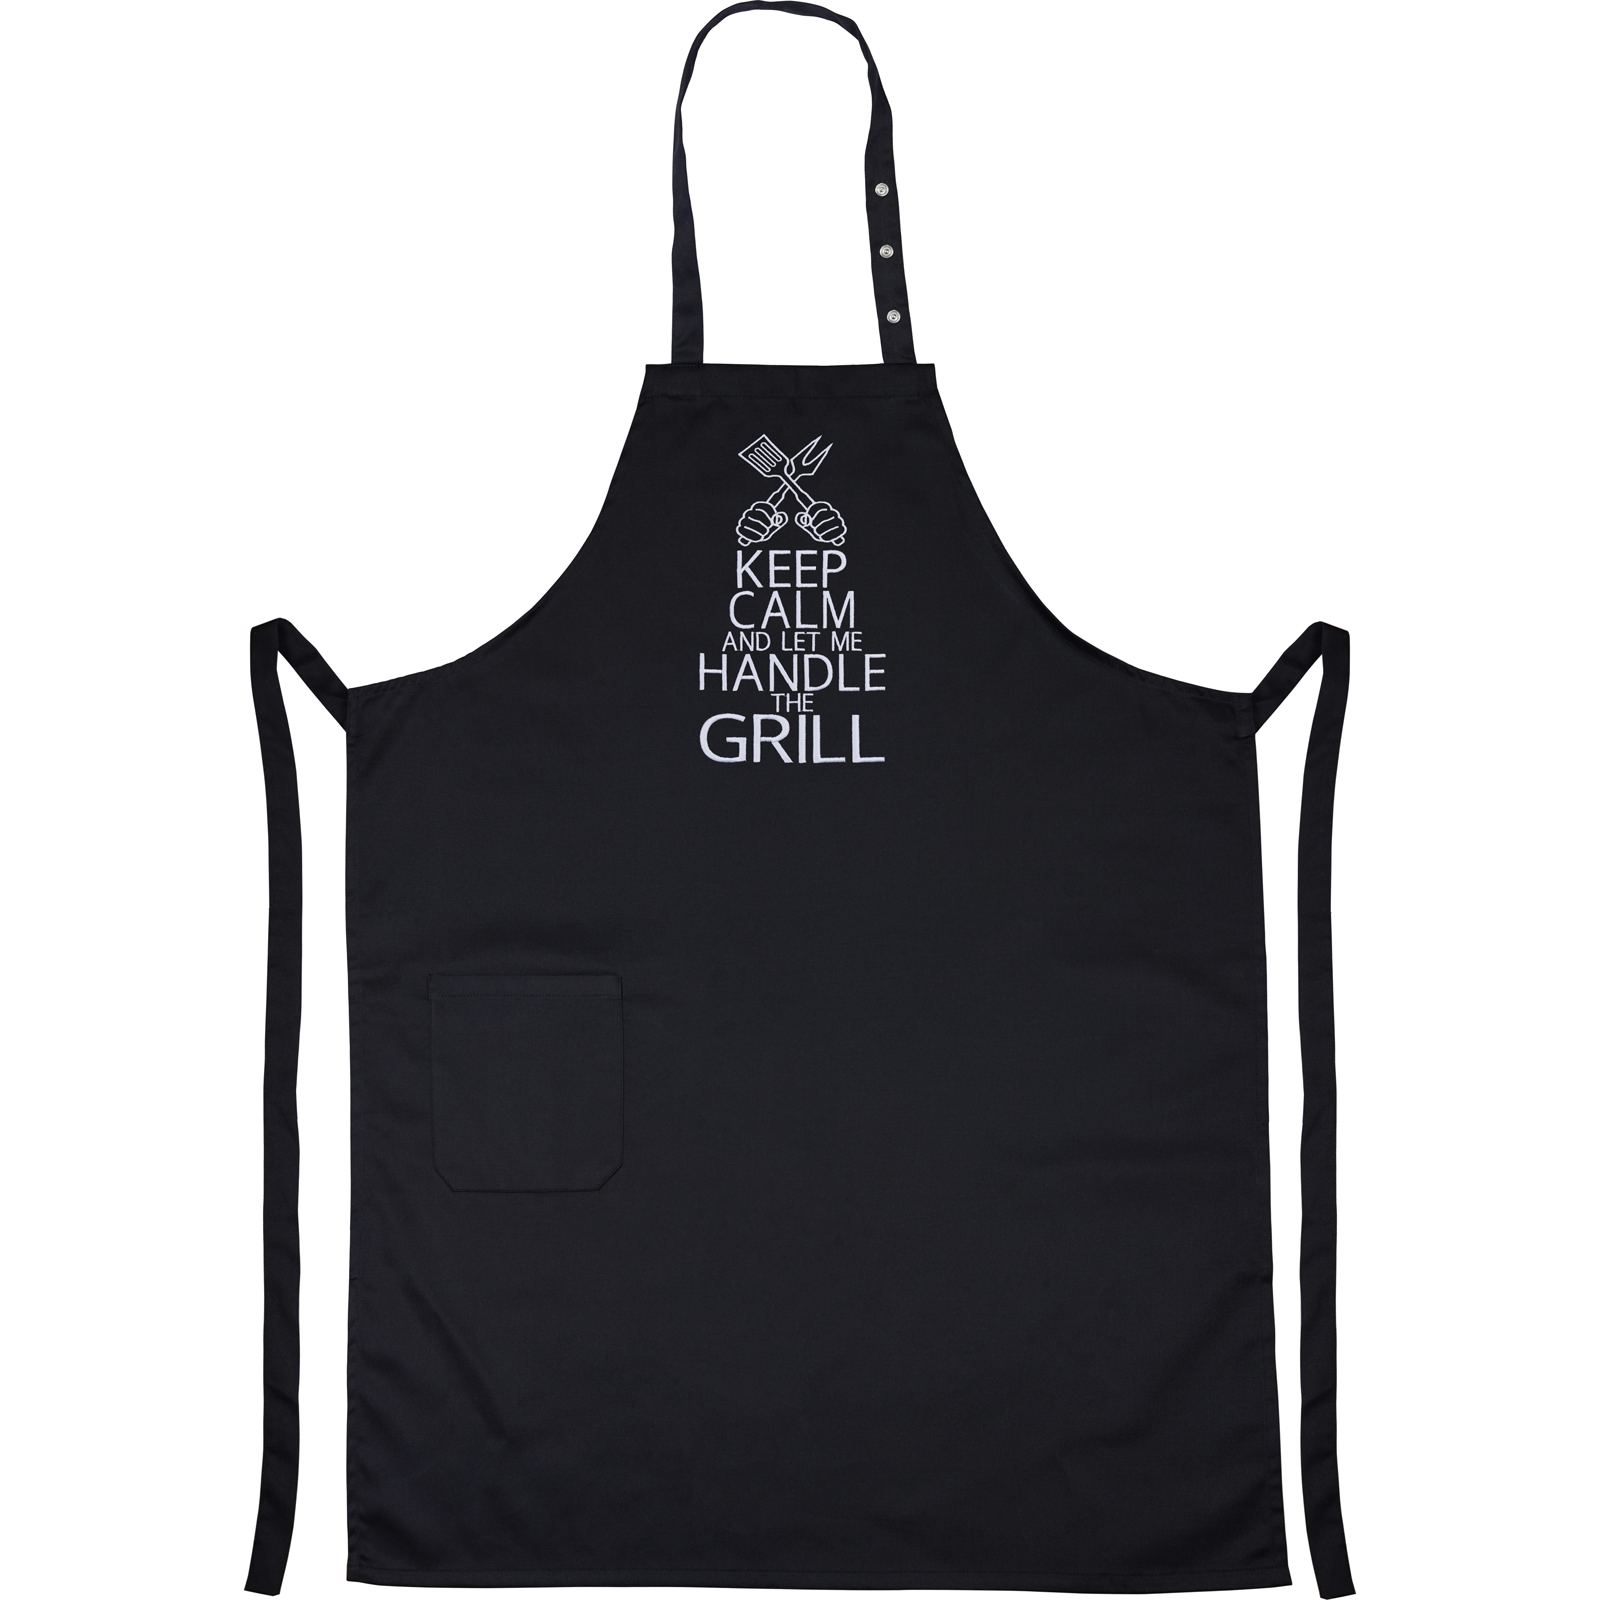 Keep calm and let me handle the grill - Grillschürze